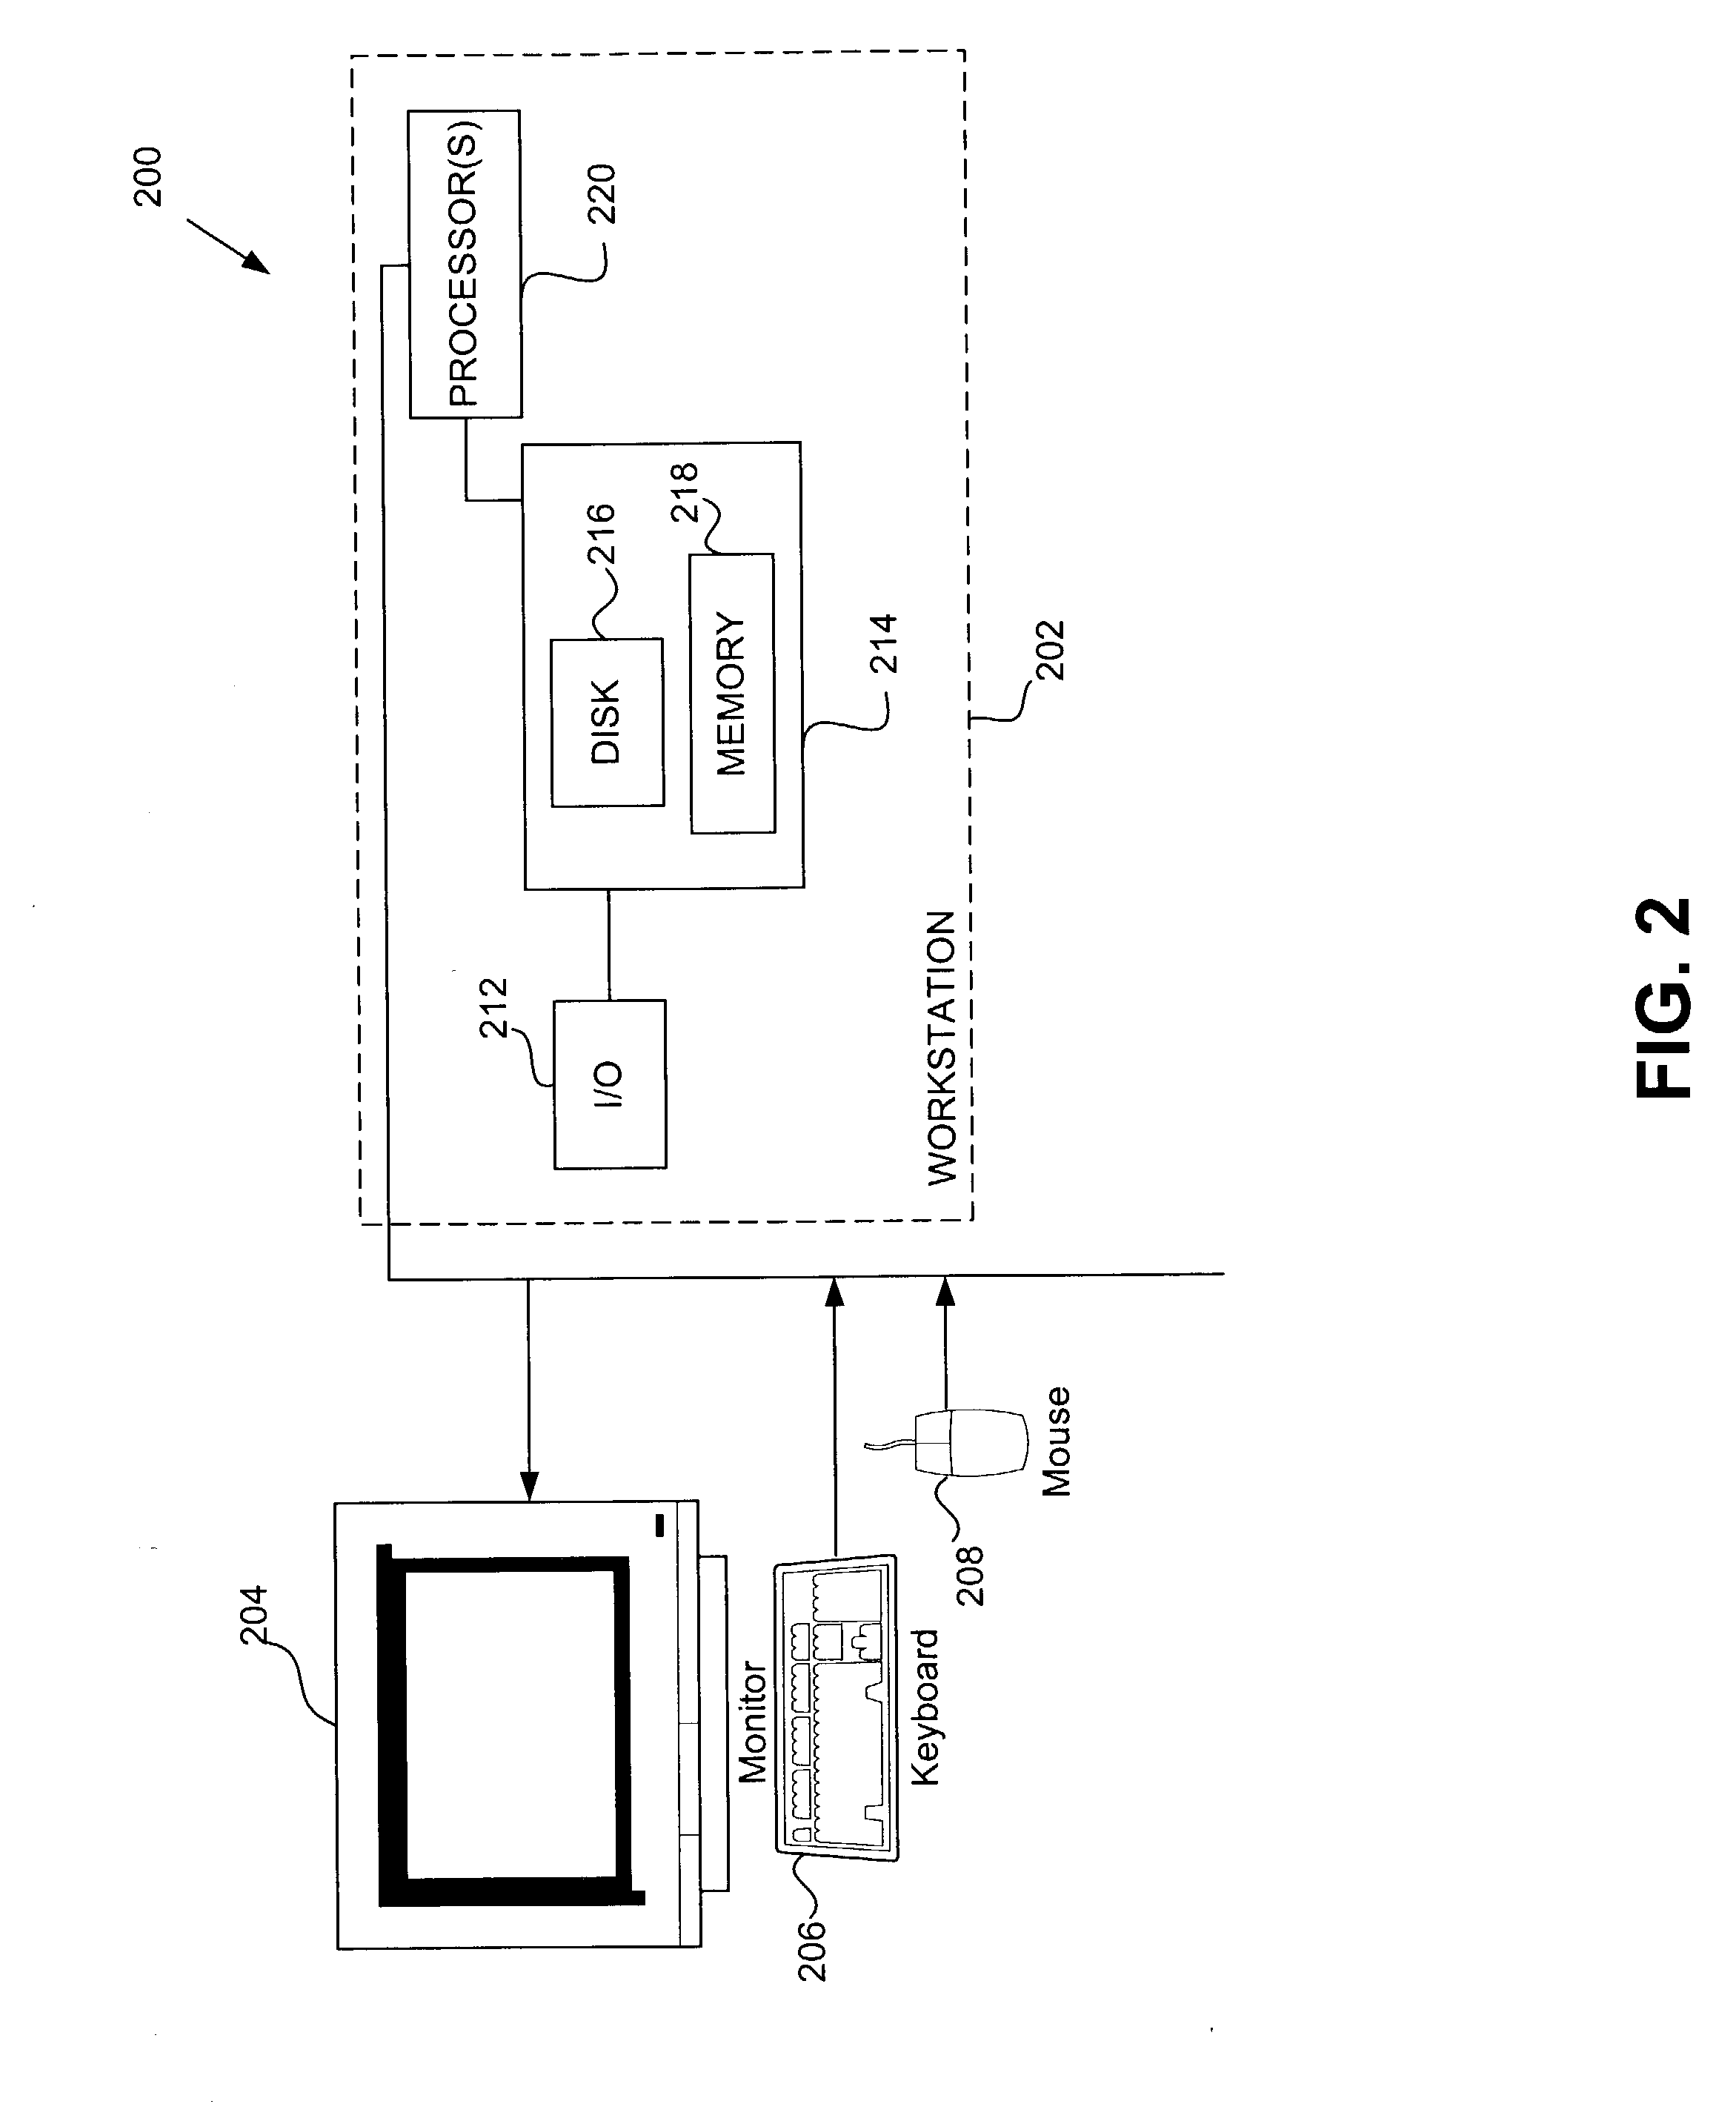 System and method for platform and language-independent development and delivery of page-based content